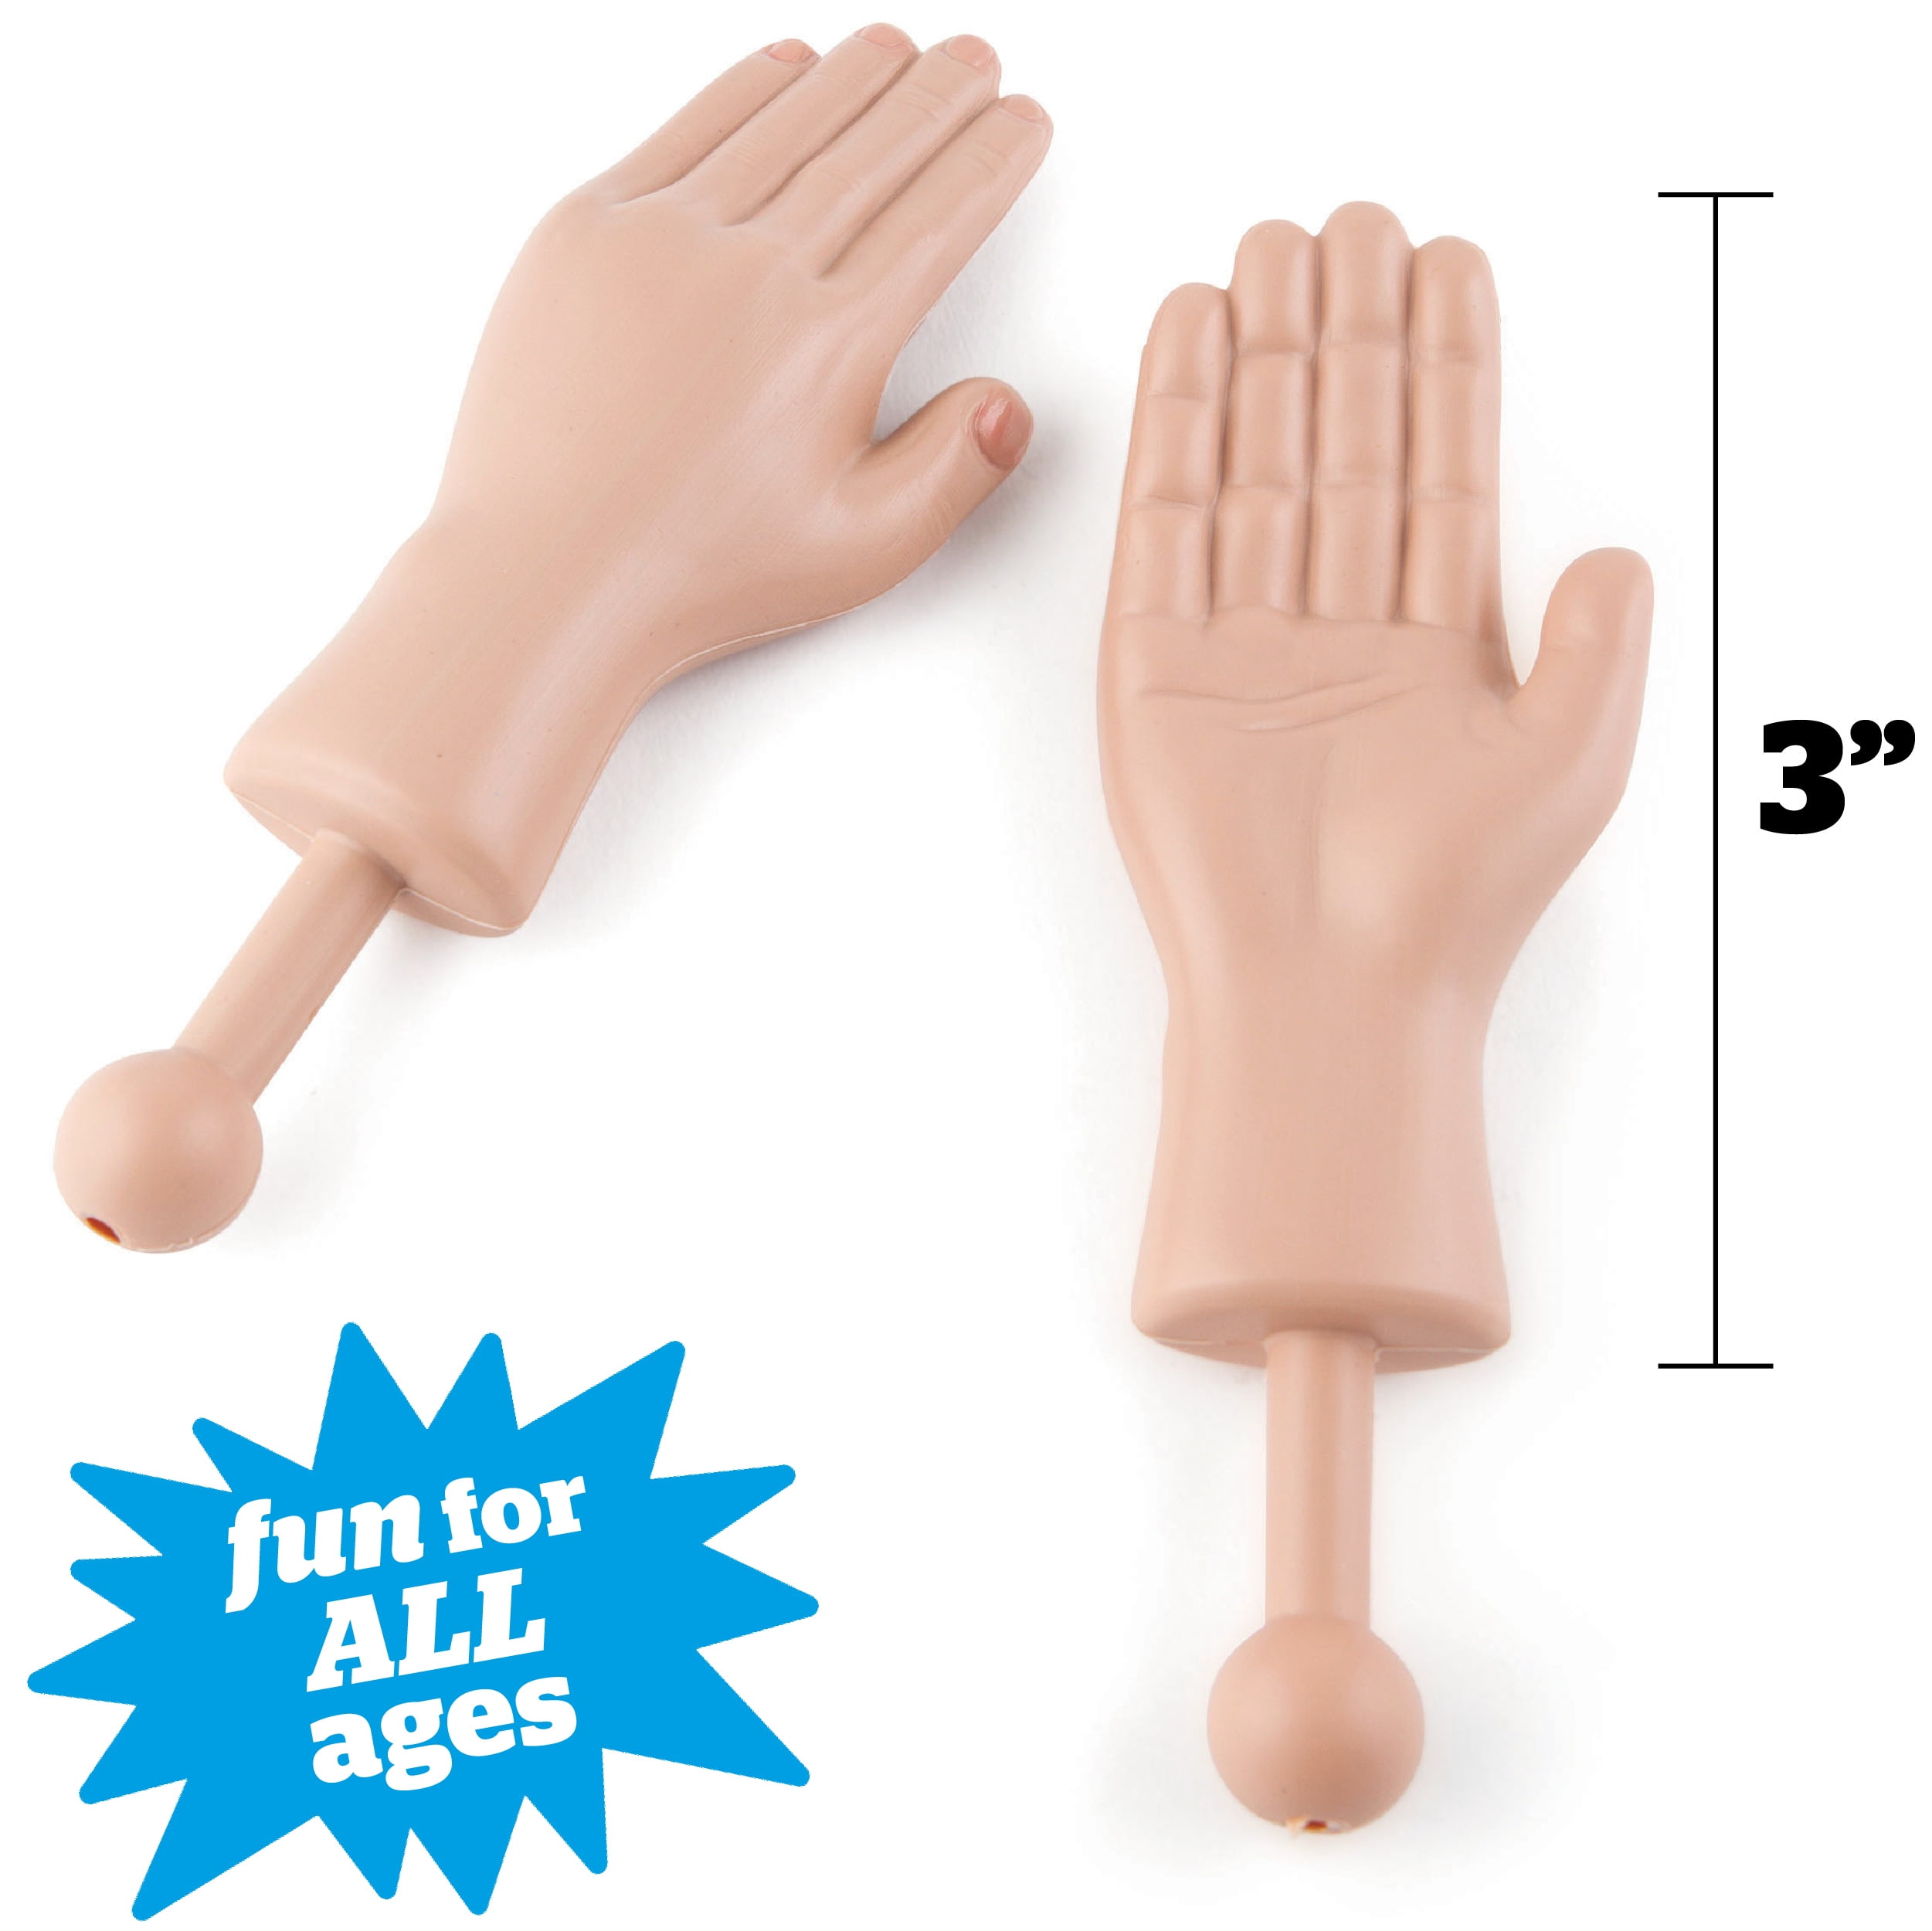 BigMouth Inc. Tiny Hands Toy ? Hilarious Realistic Looking 3? Plastic Hands  for Costumes and Pranks, Tricks to Keep up Your Sleeve, Little Hands Toys